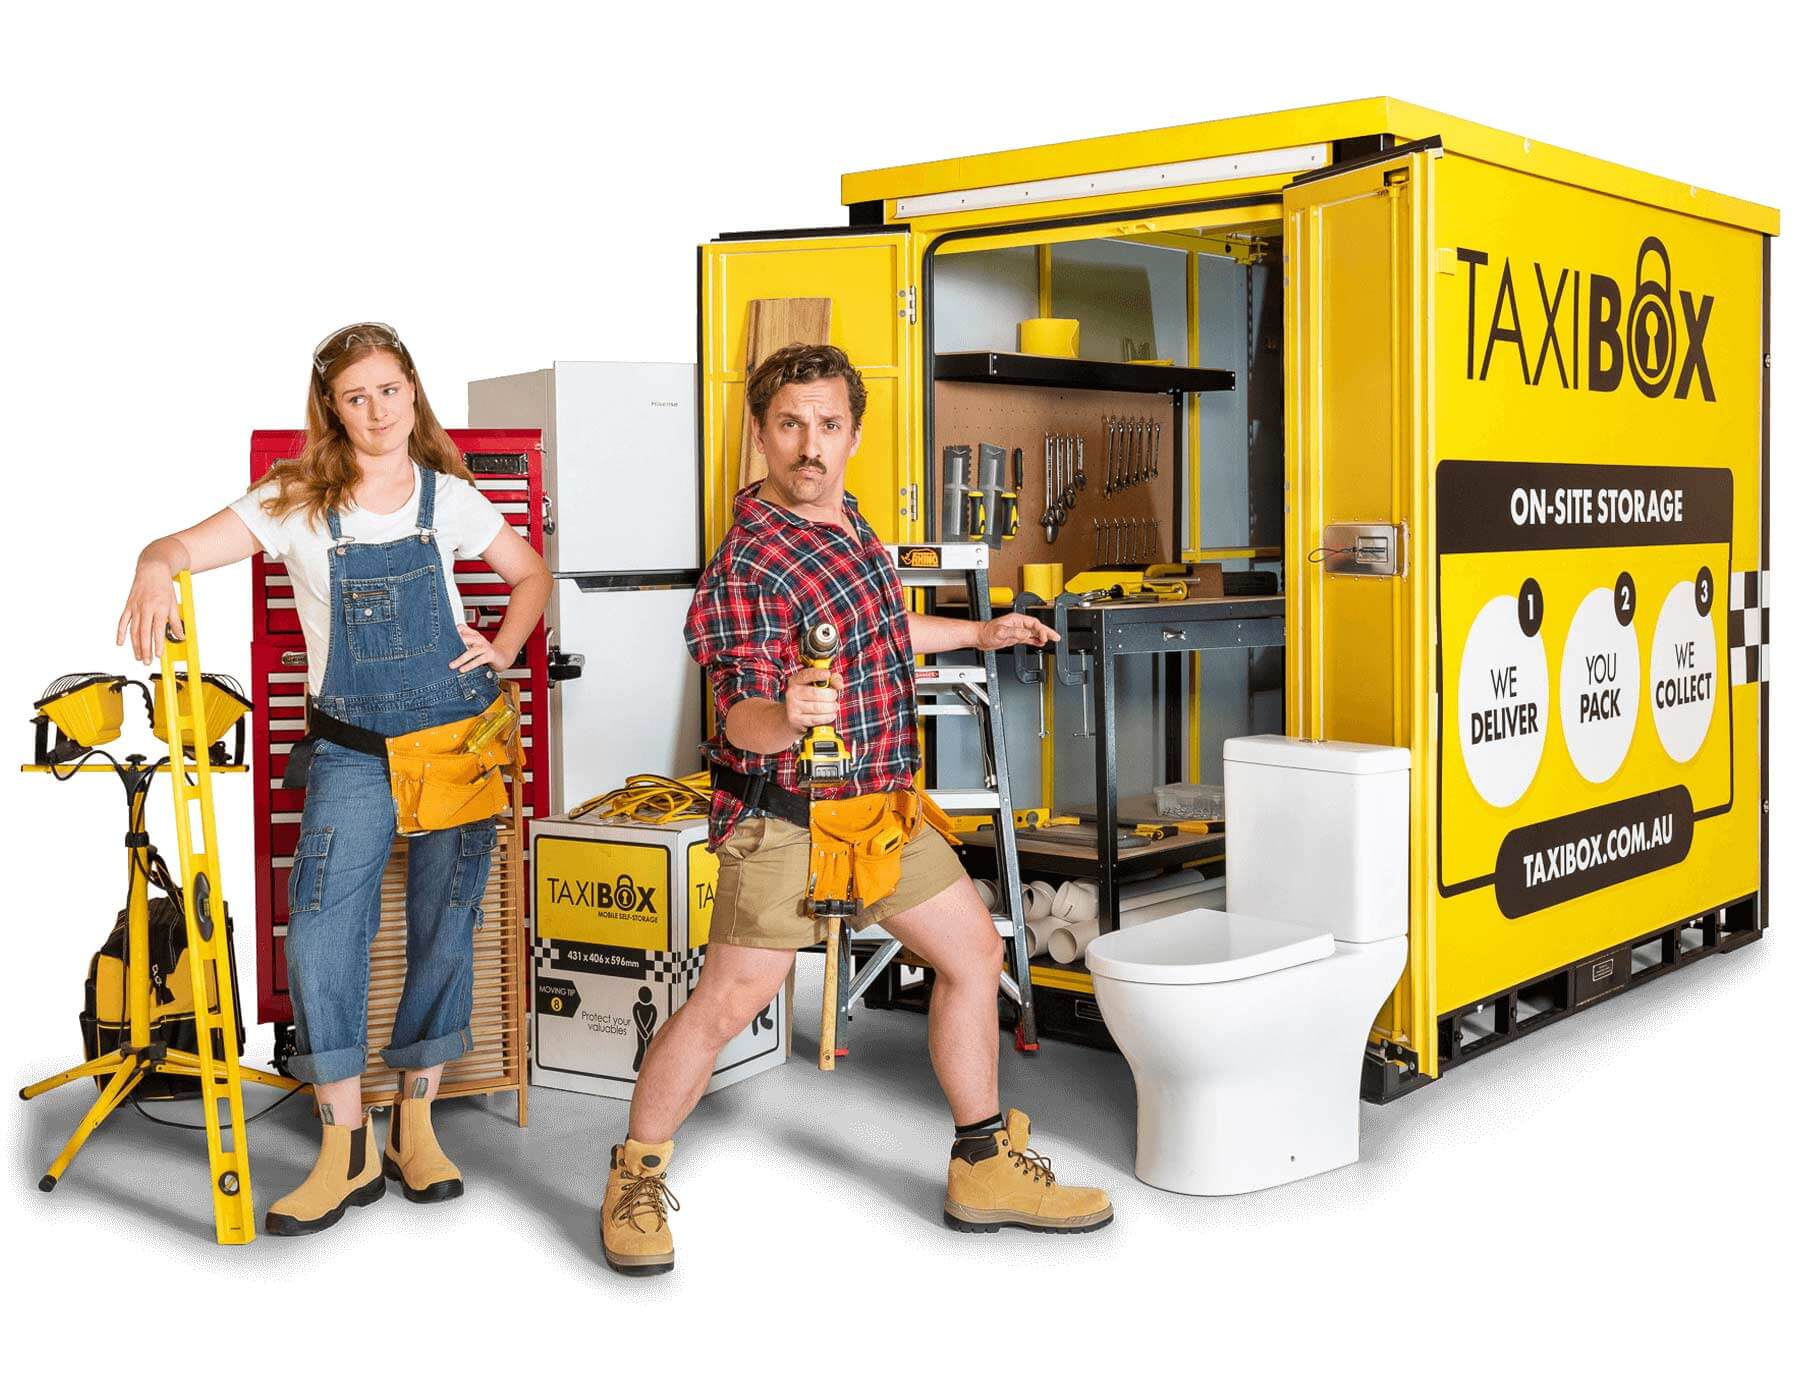 TAXIBOX - Mobile storage, On-site Storage and Cool Storage